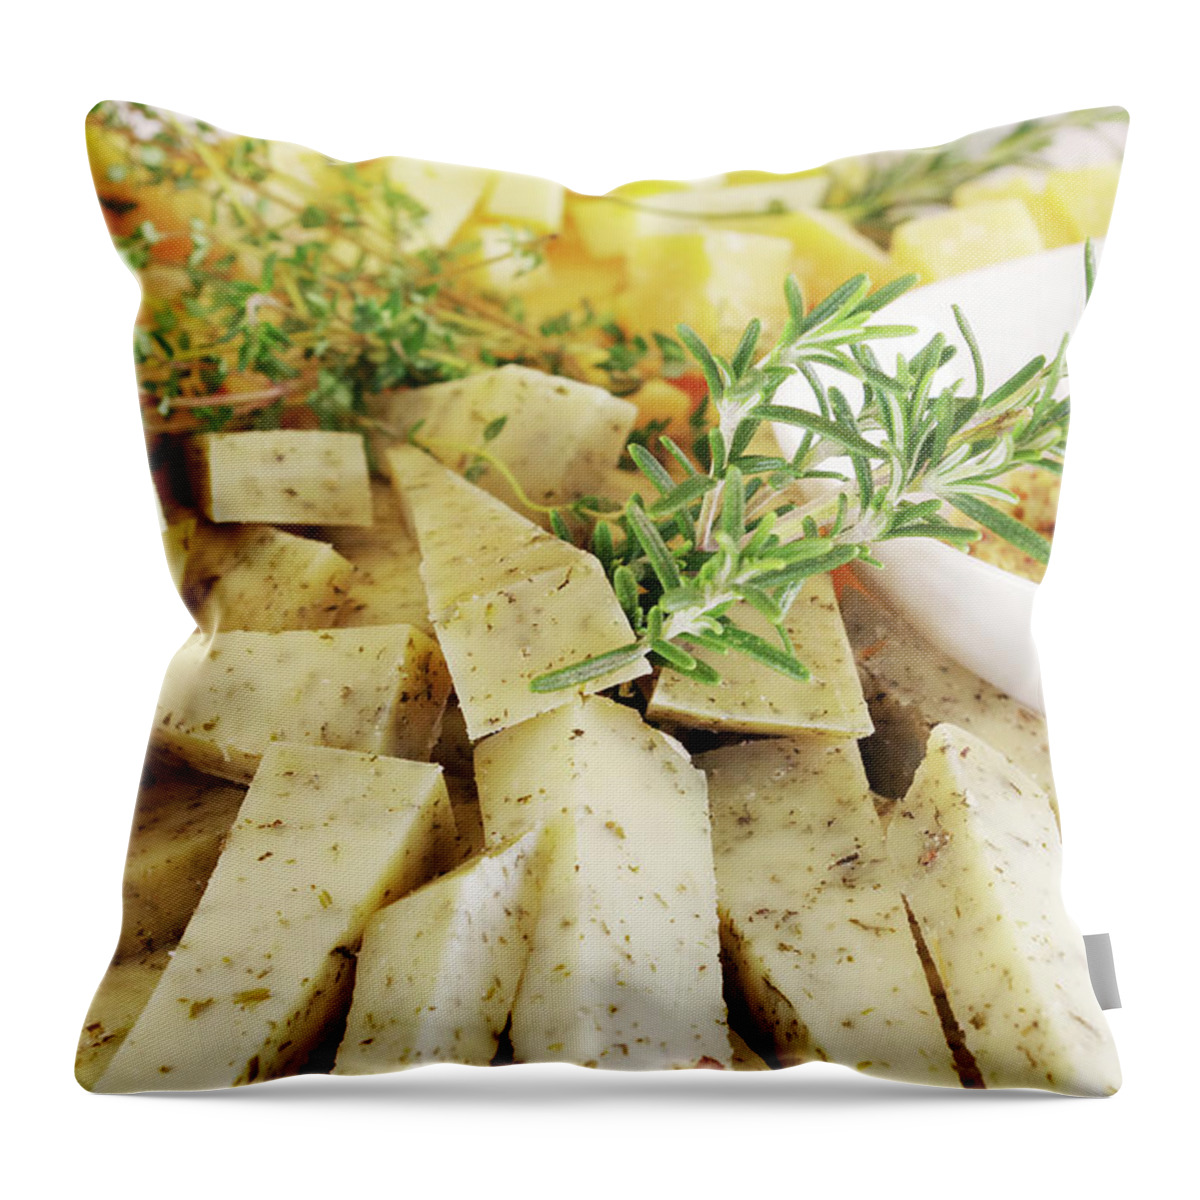 Side Dish Throw Pillow featuring the photograph Cheese platter by Kaoru Shimada